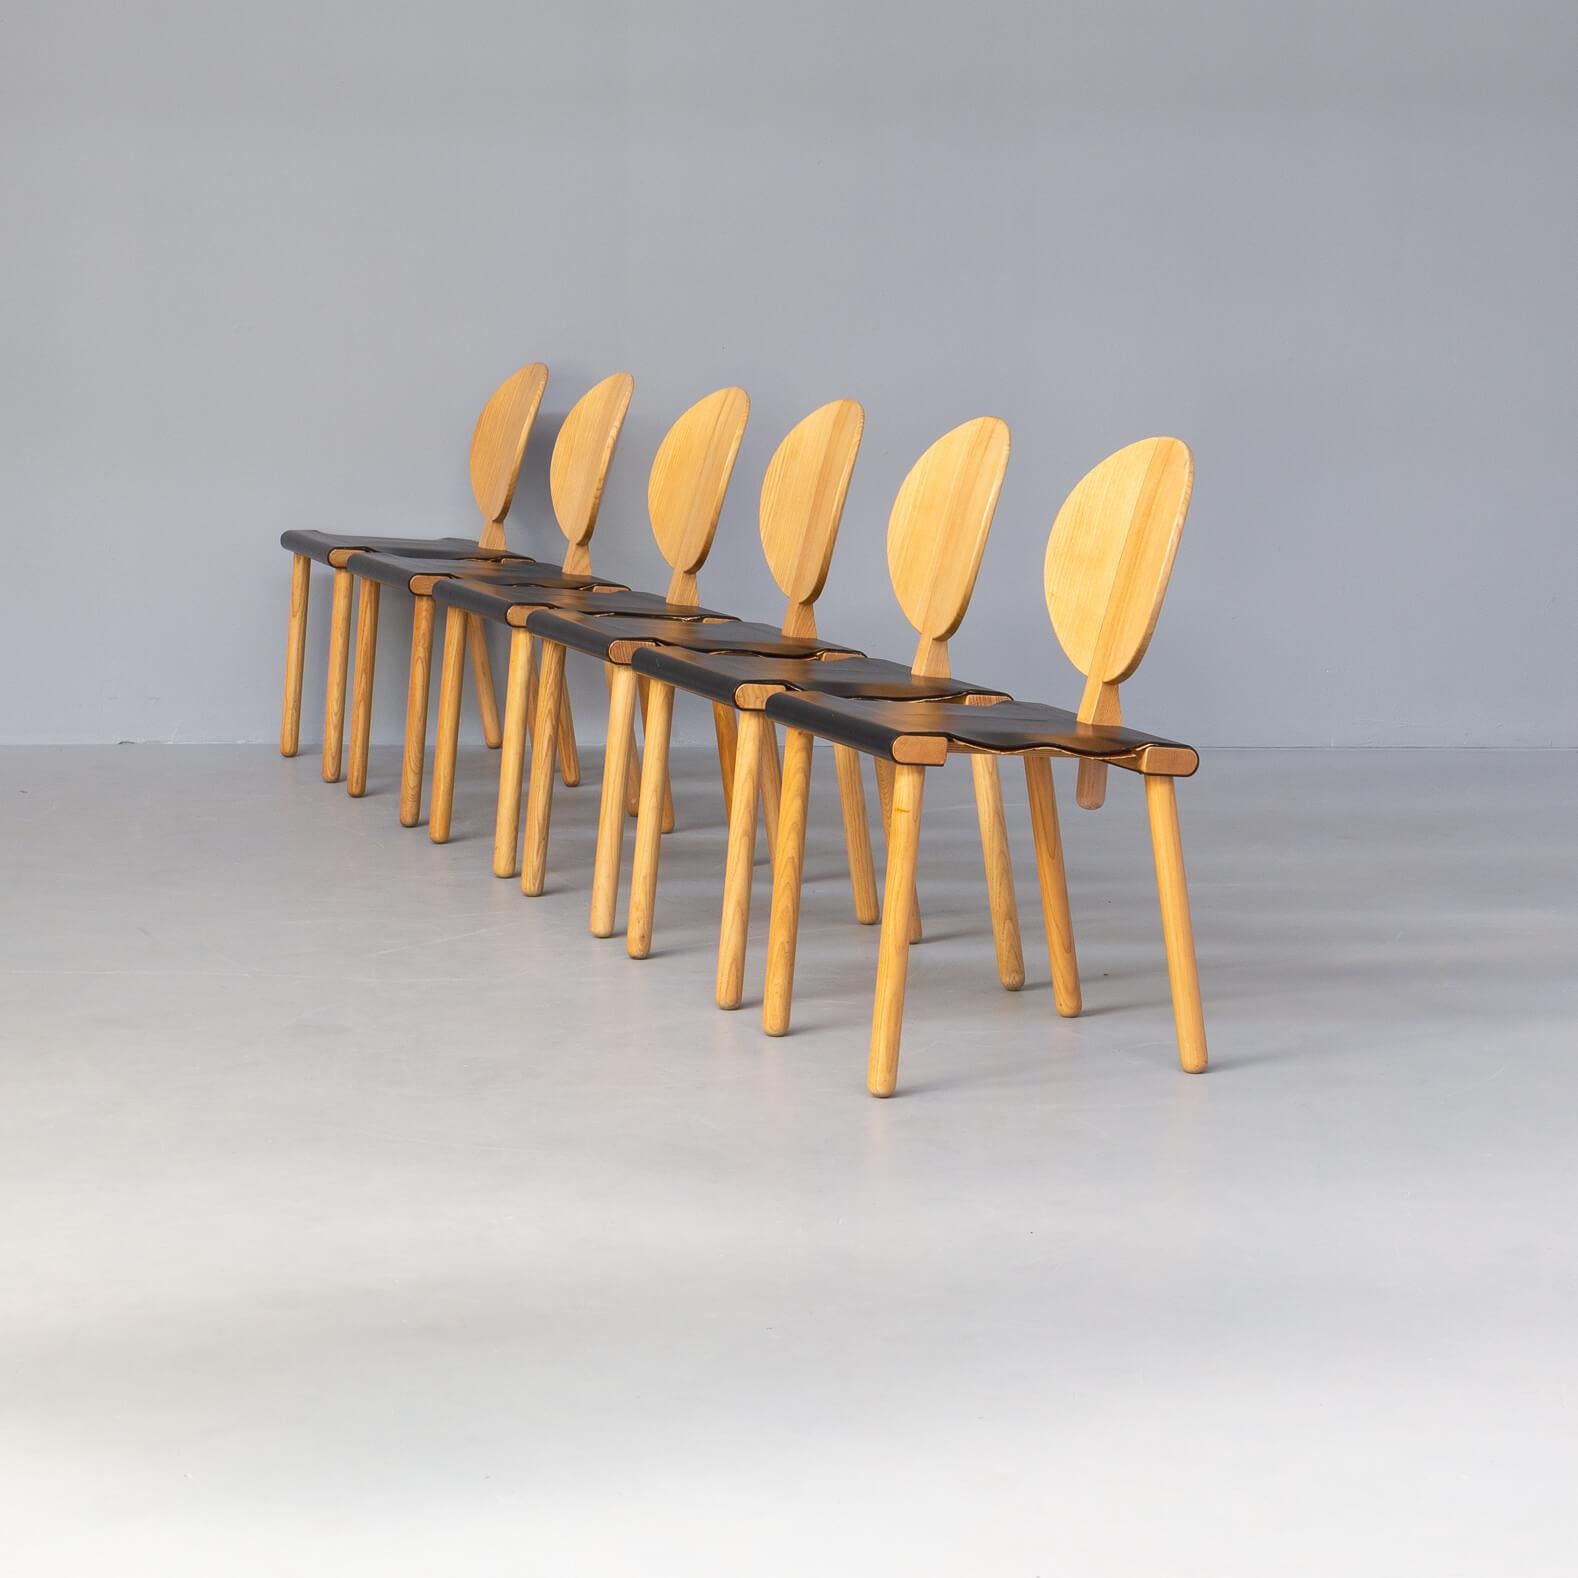 In the 1970s Sabadin designed a lot different and timeless design furnitures and specialized in the working with rounded forms in wood and plywood. Pala, Arca, Peota and also the Fiona chair show beautiful rounded plywood forms with straight lines